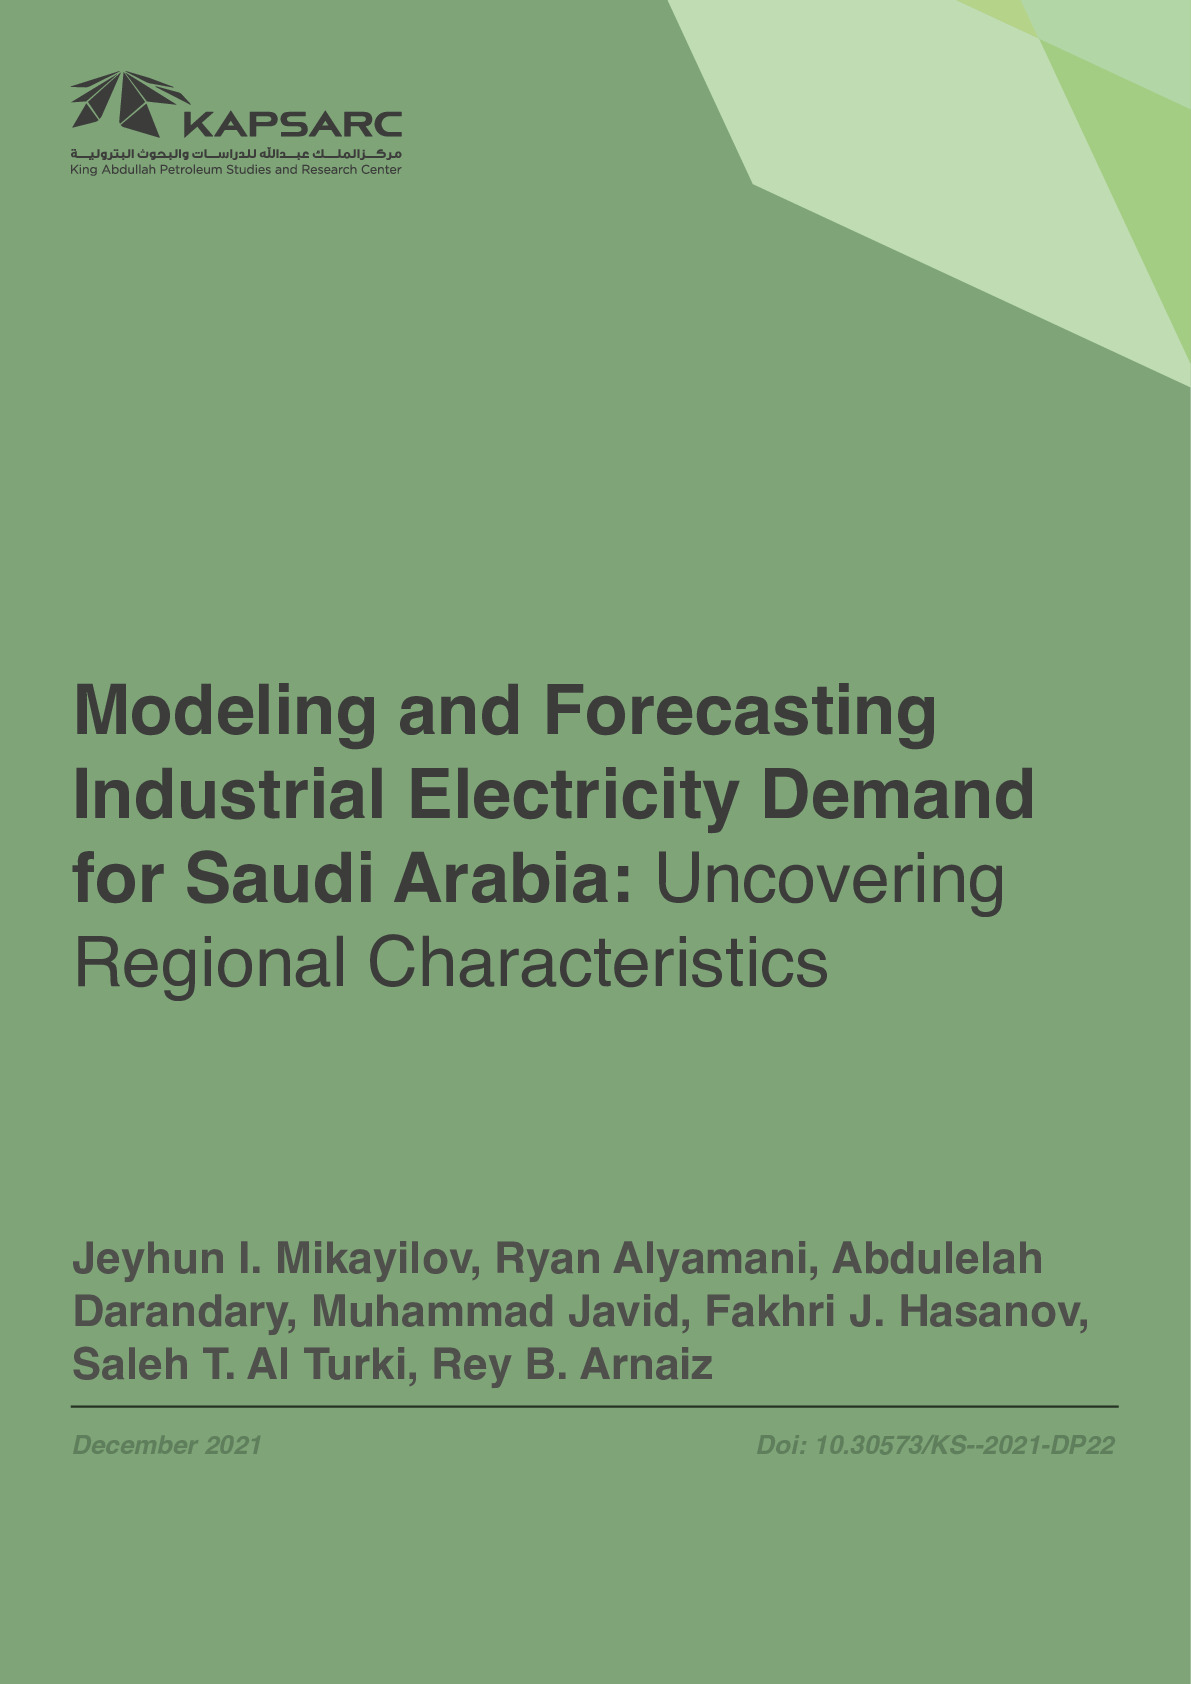 Modeling and Forecasting Industrial Electricity Demand for Saudi Arabia: Uncovering Regional Characteristics